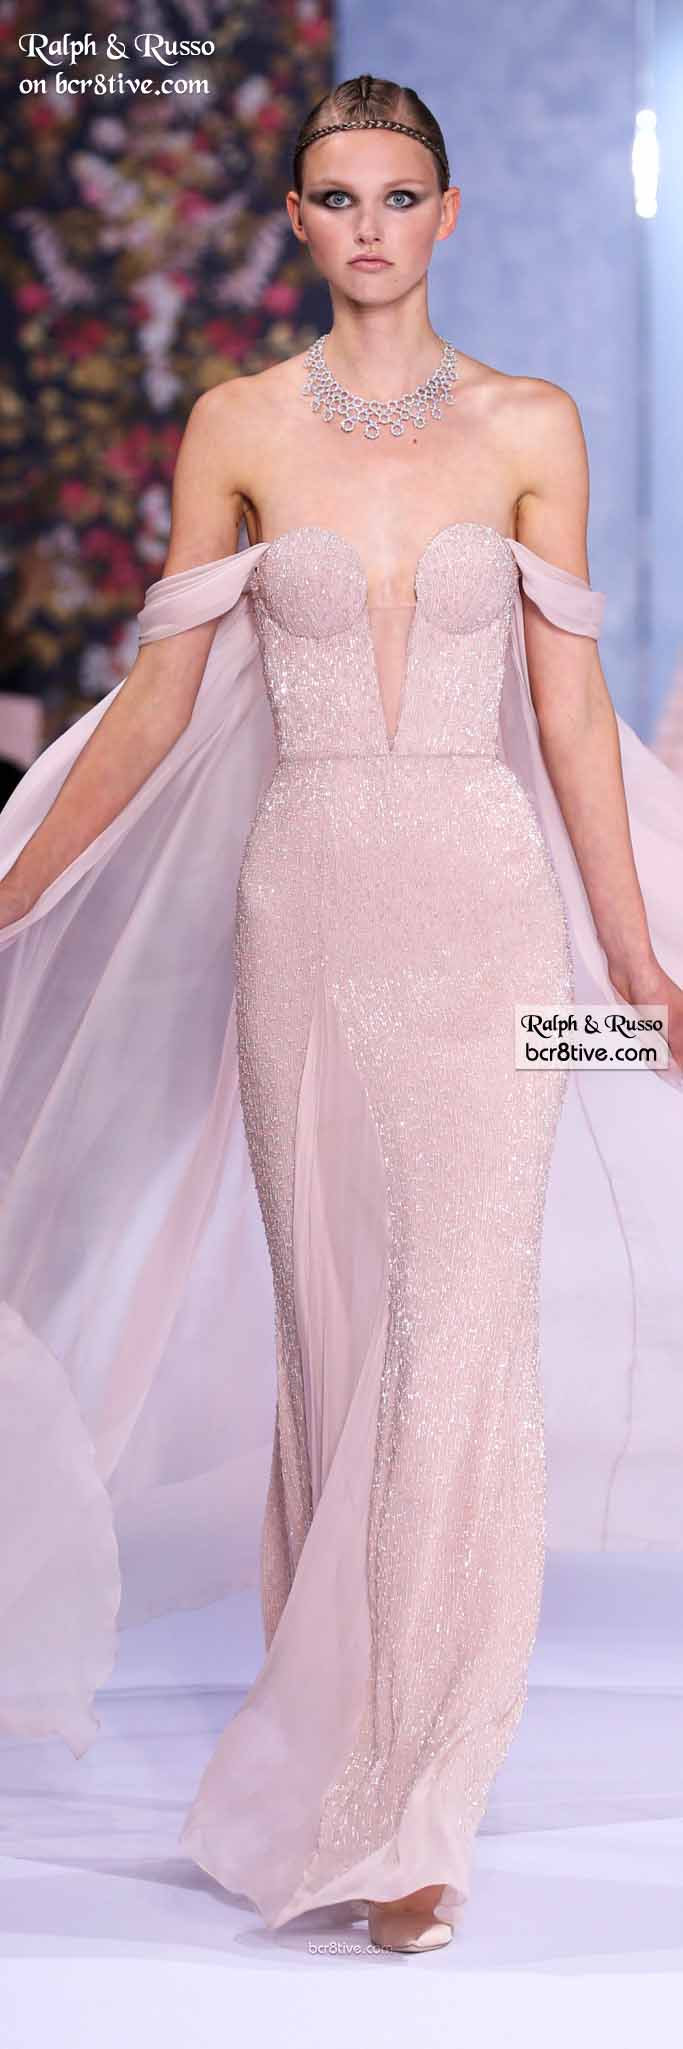 Ralph & Russo Fall 2016 Haute Couture